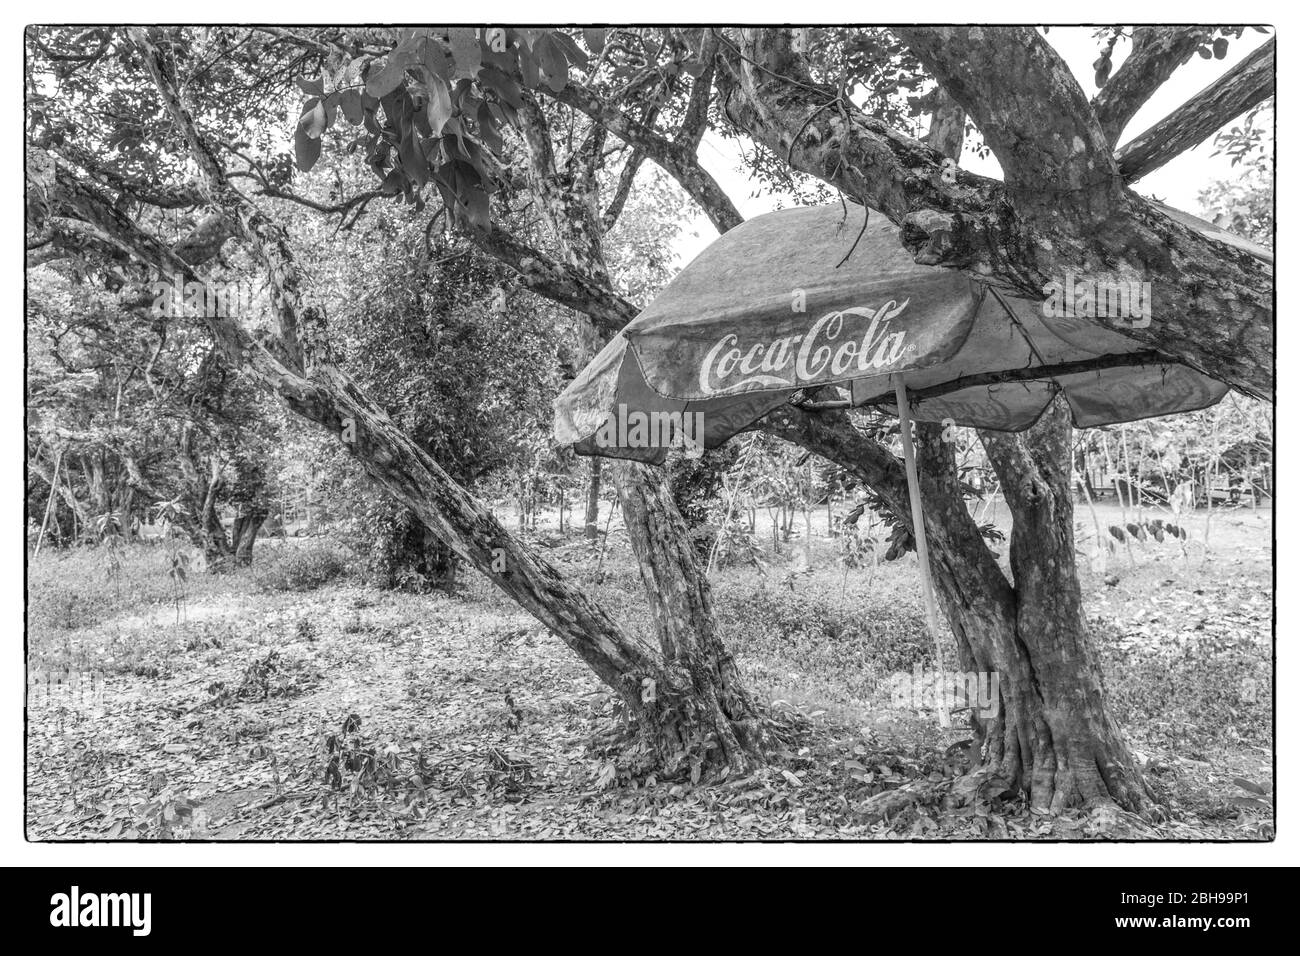 Cambodia, Phnom Penh, The Killing Fields of Choeung Ek, old Coca Cola umbrella in former Khmer Rouge prison camp Stock Photo